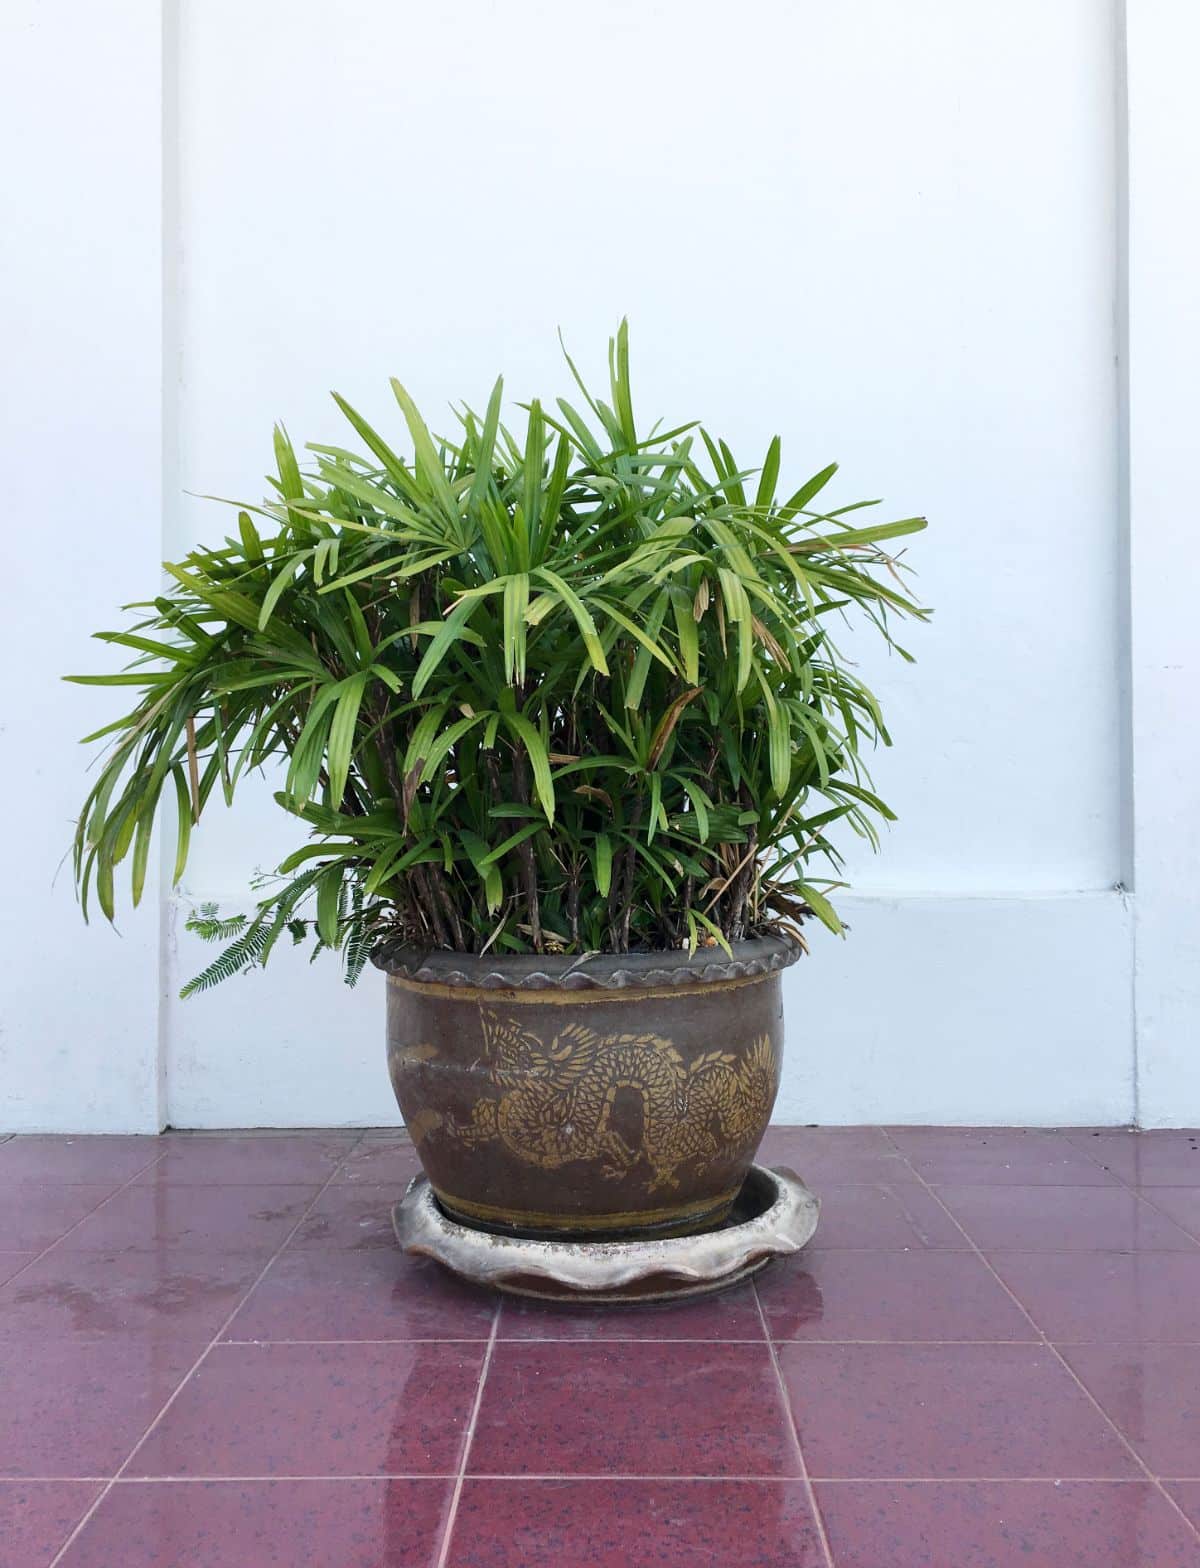 A young Lady Palm in a brown pot on a floor.